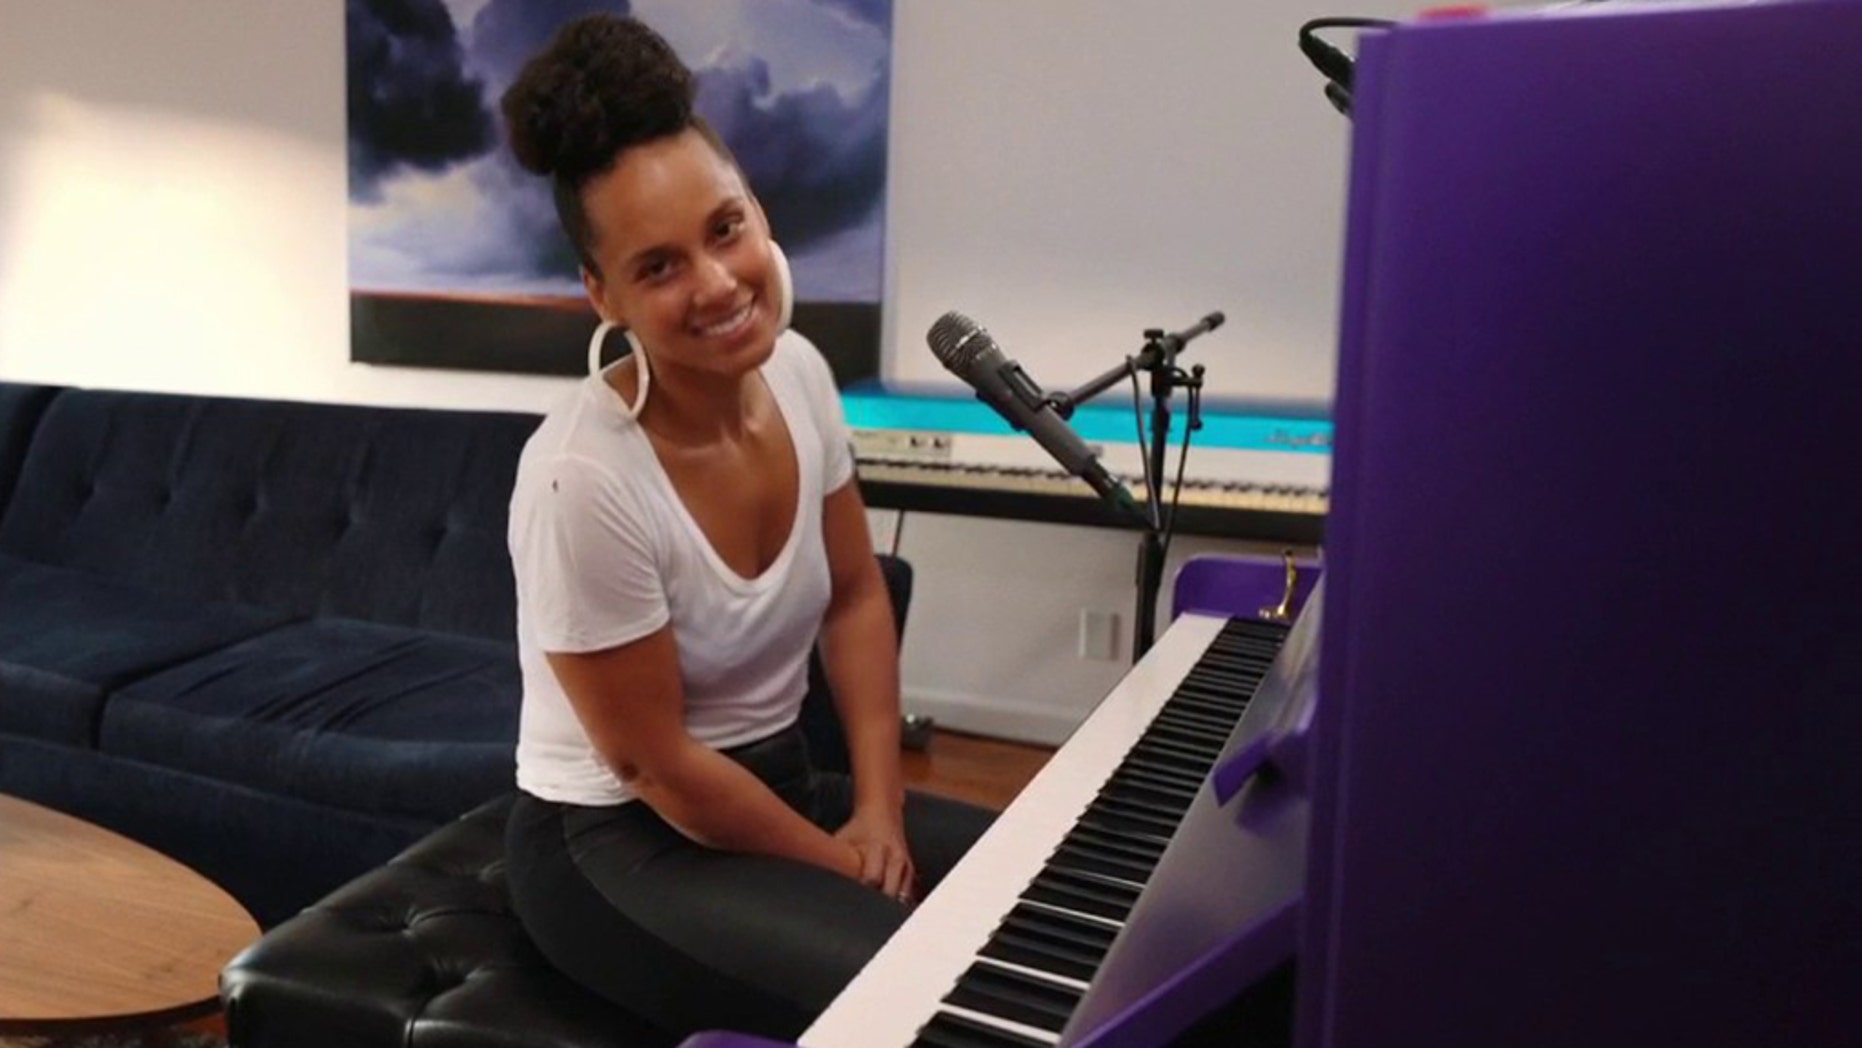 Alicia Keys dedicated her song to first responders and medical professionals keeping the nation safe.